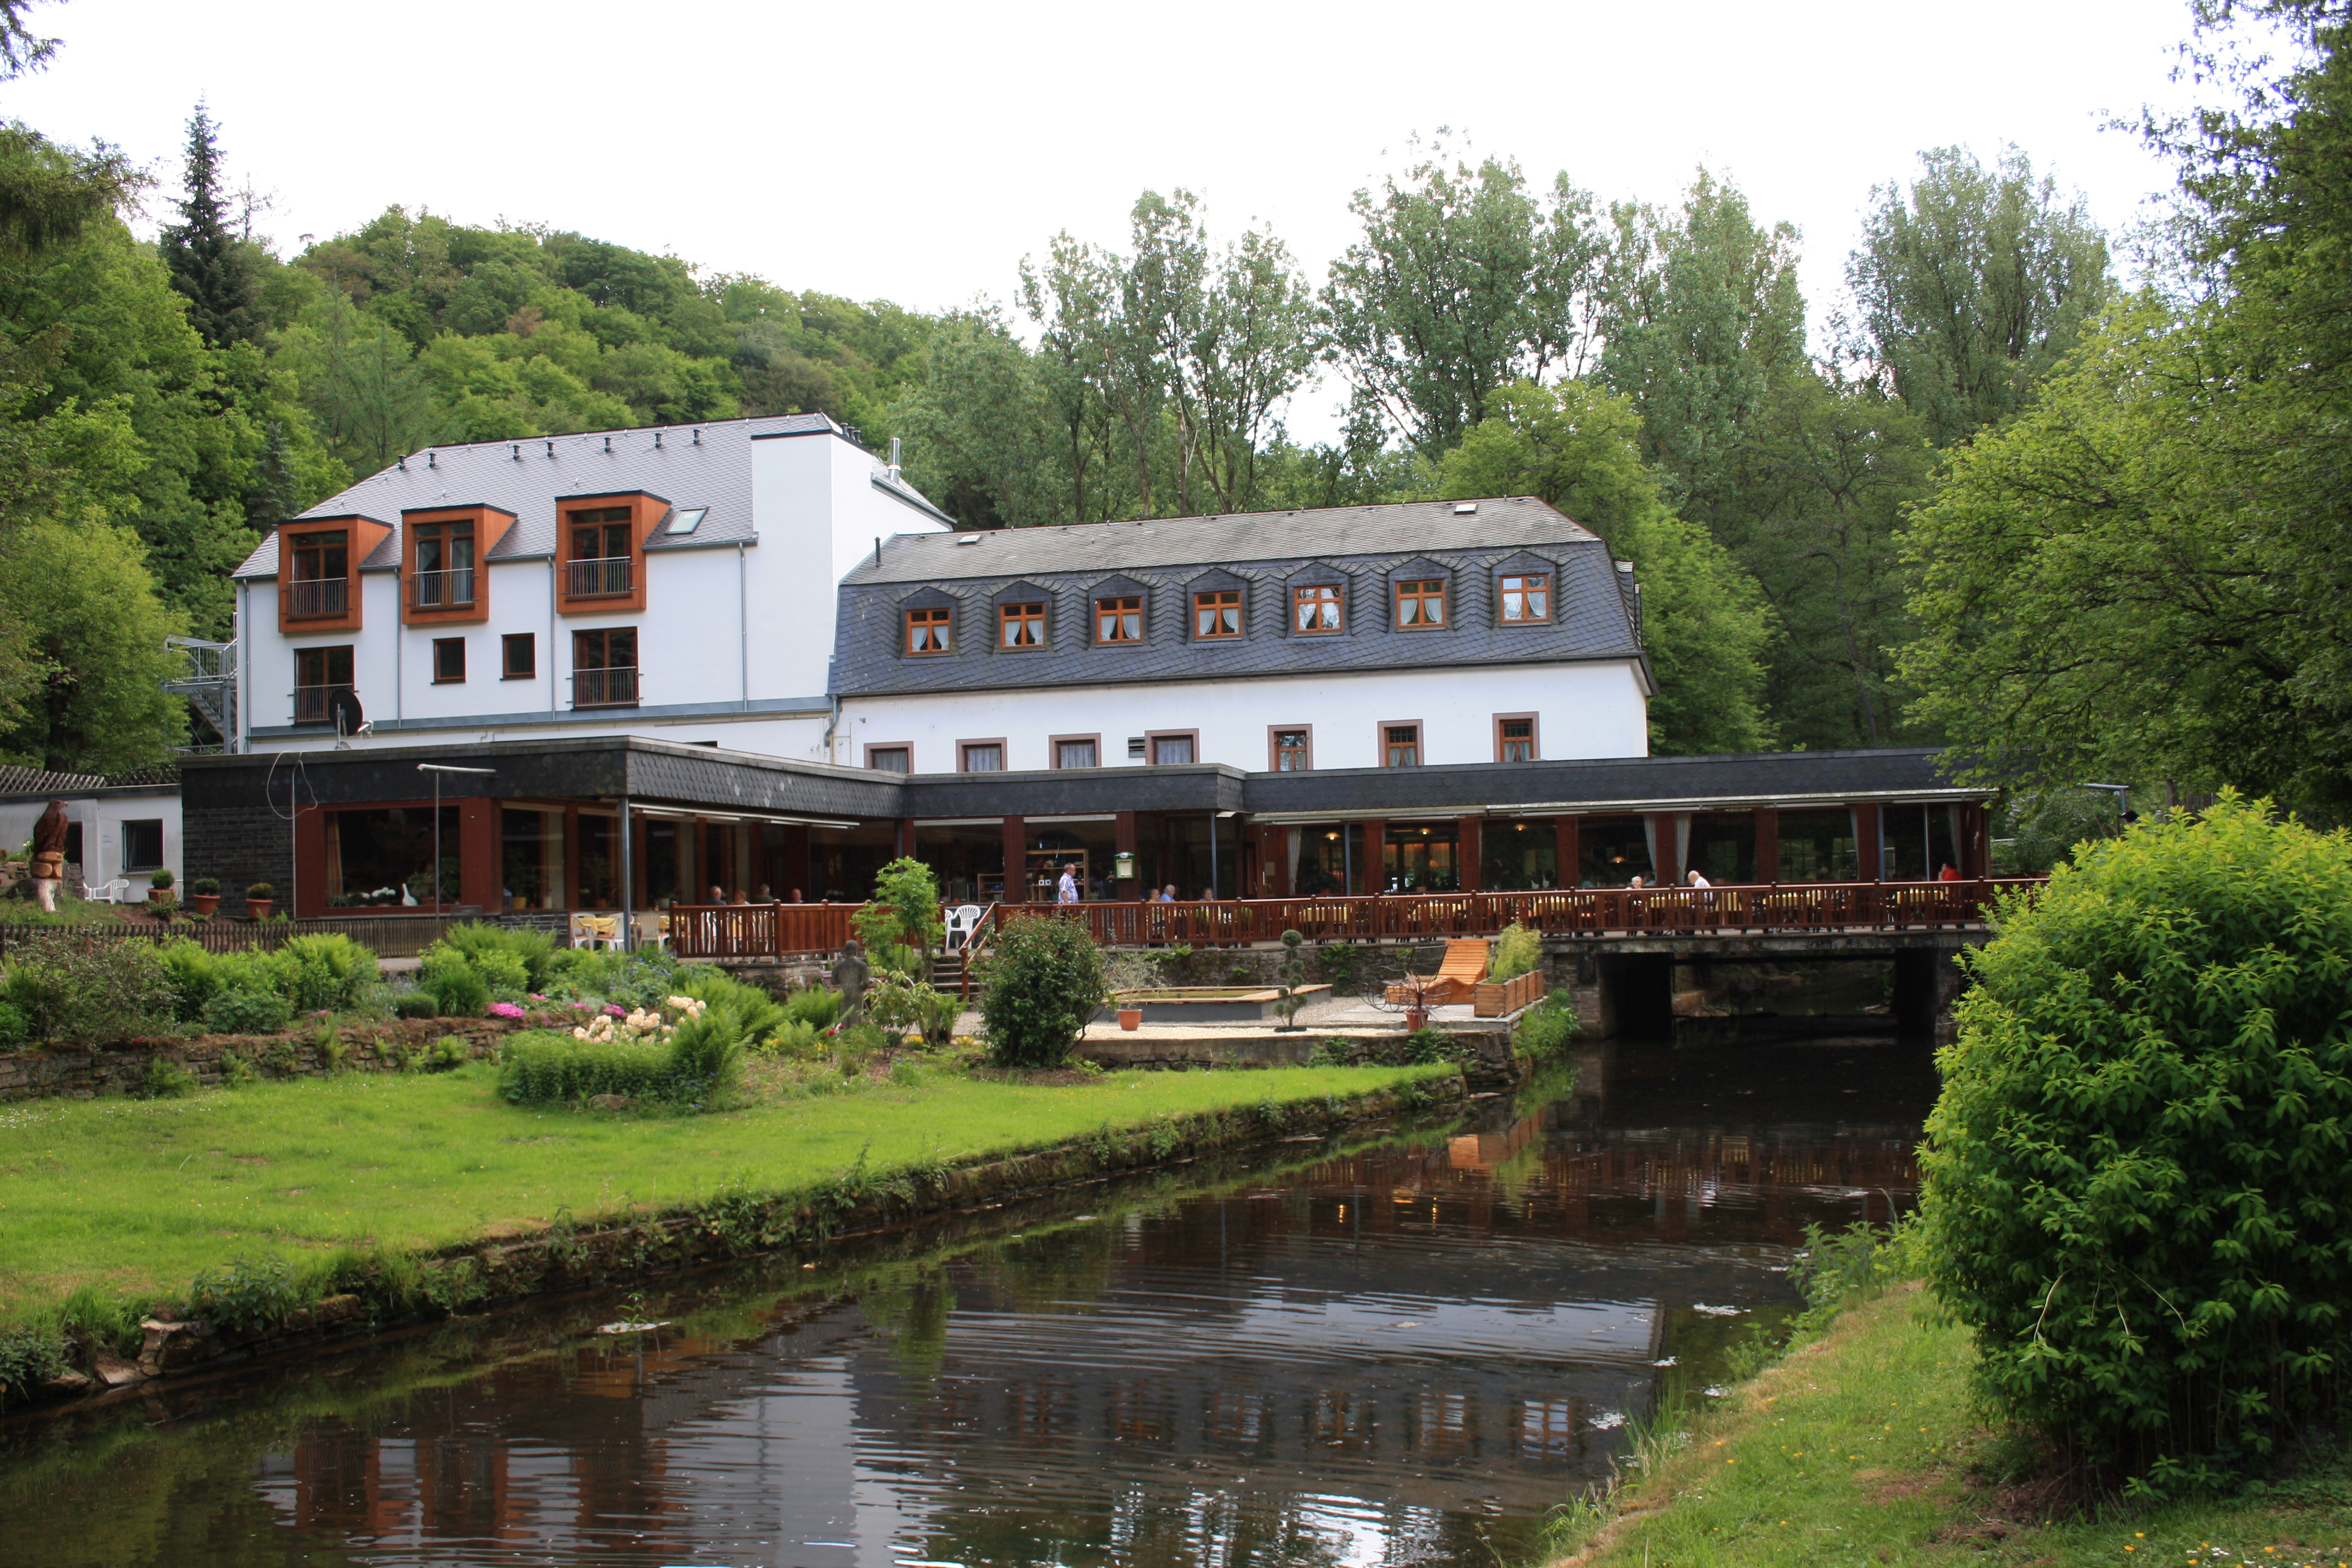 Hotel Heidsmühle <br/>118.00 ew <br/> <a href='http://vakantieoplossing.nl/outpage/?id=89828bd2e9423b7a1c75596c767215e0' target='_blank'>View Details</a>